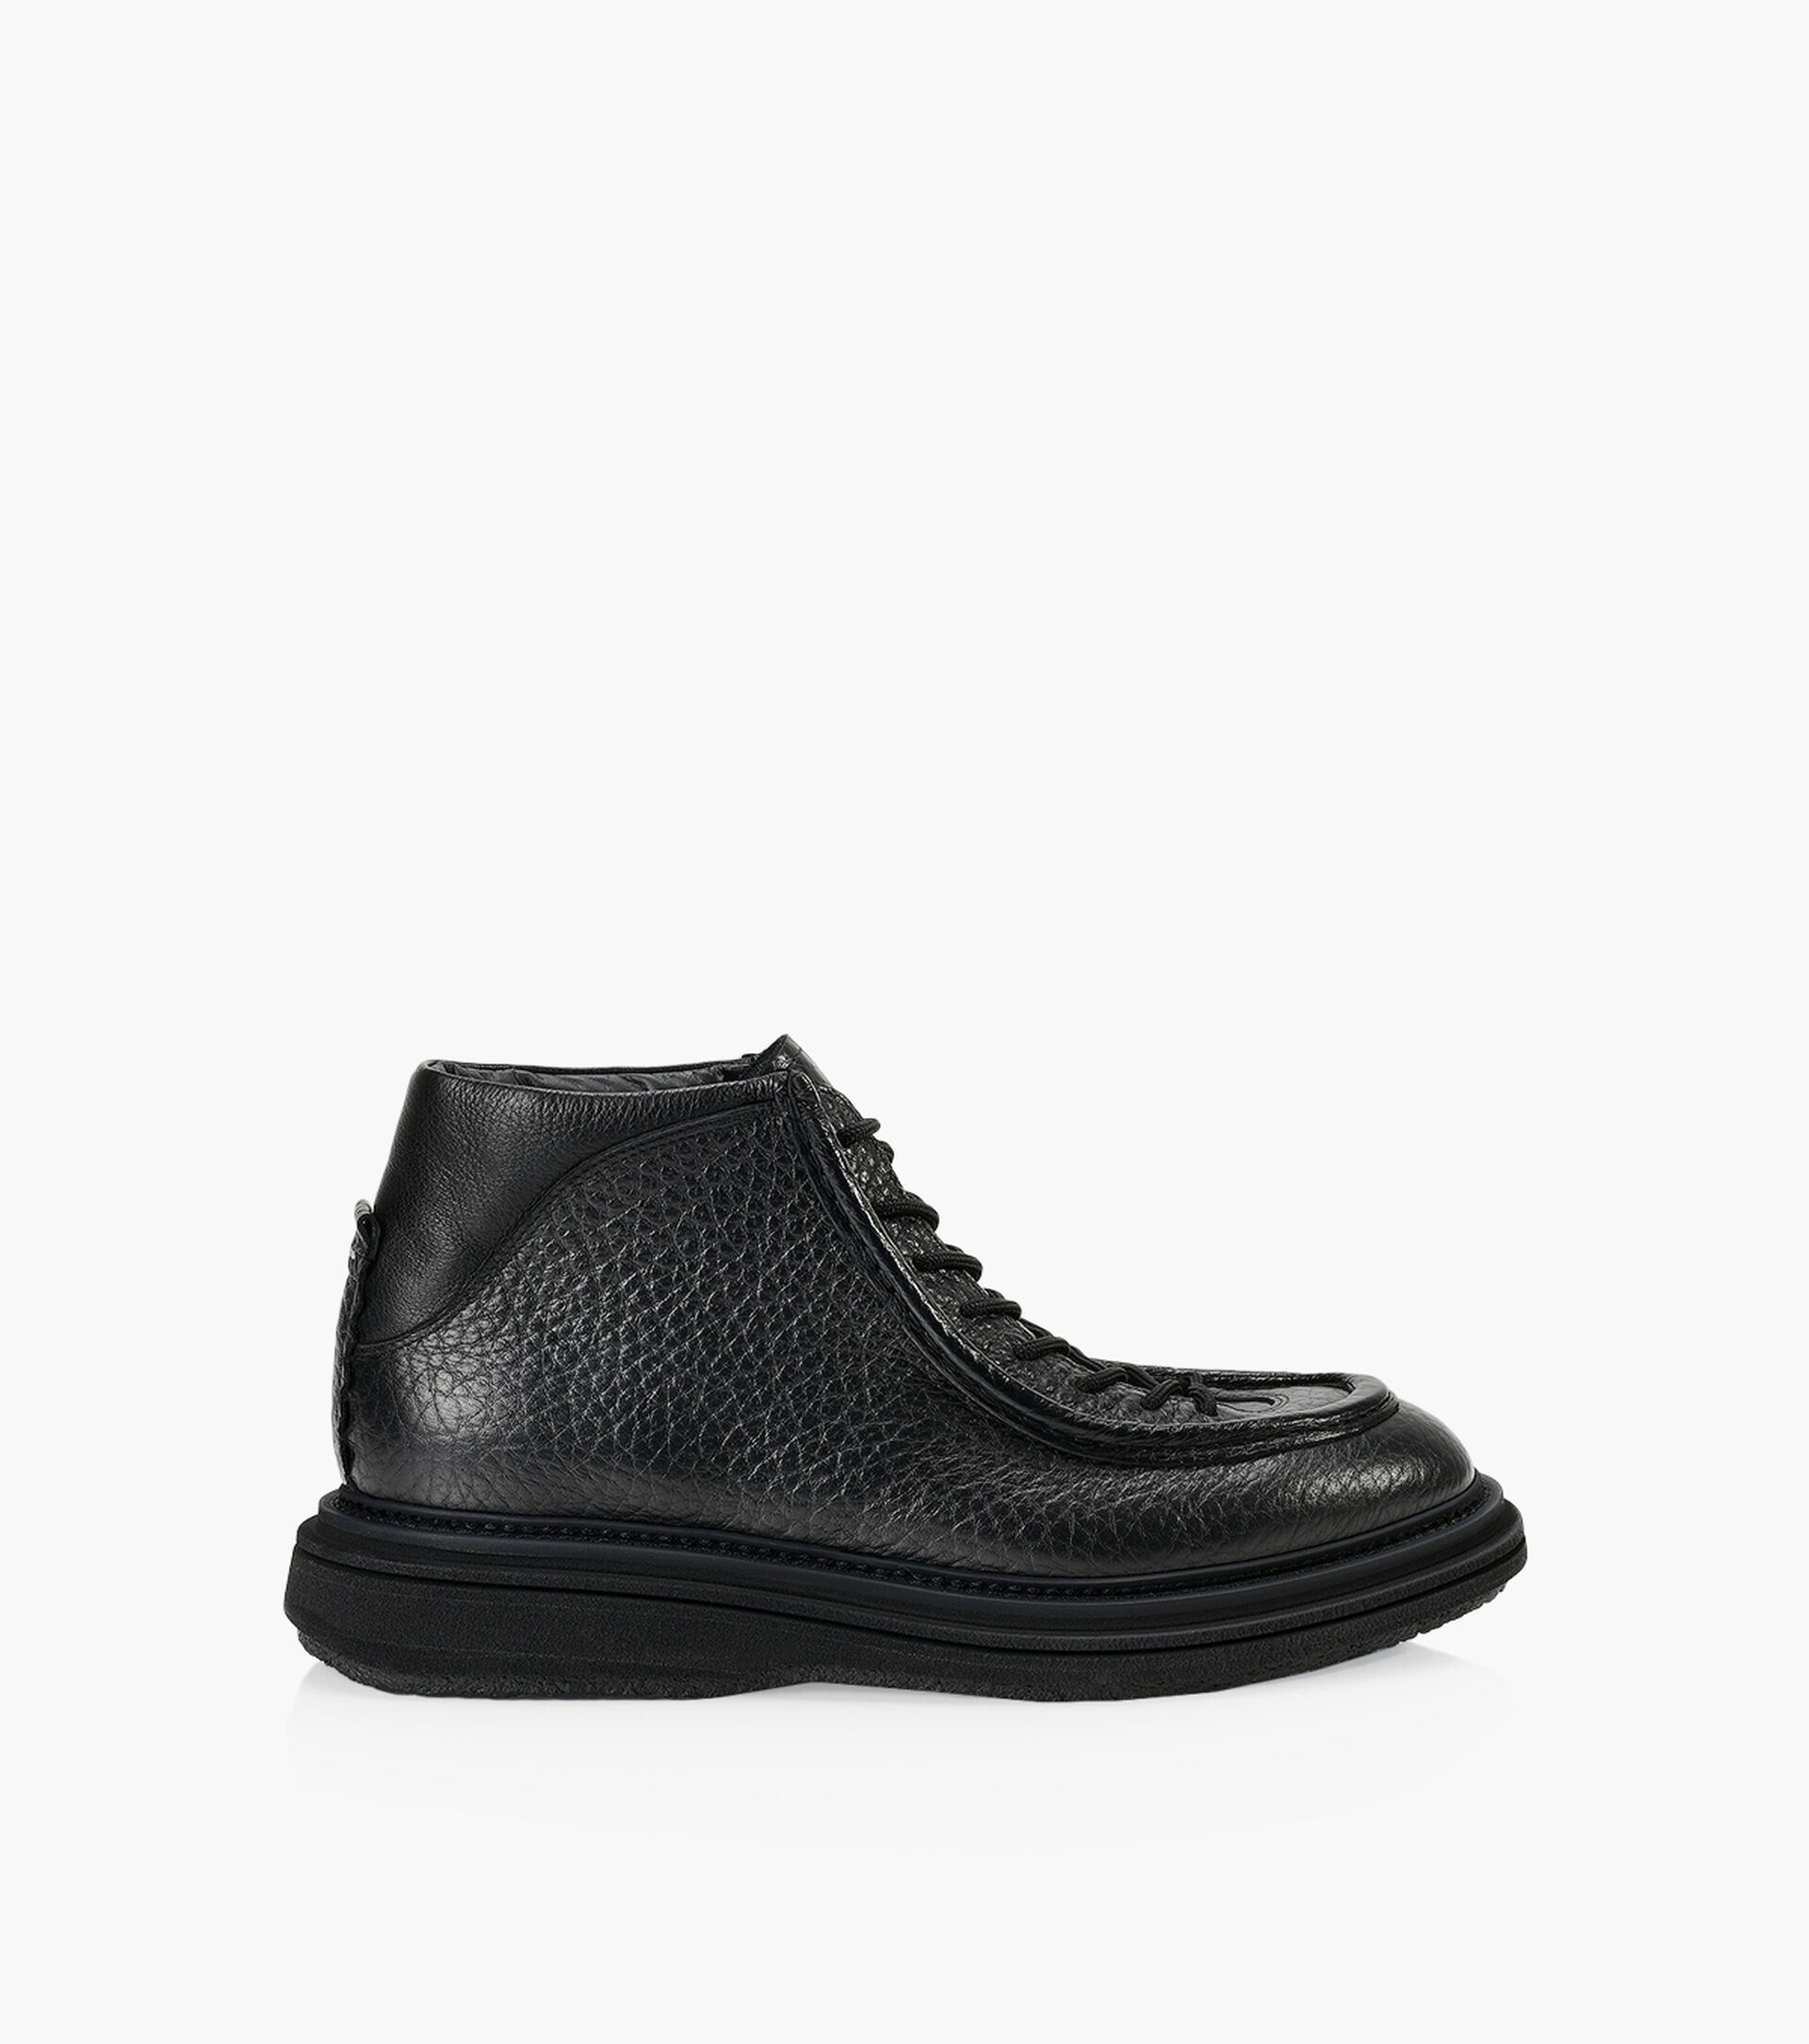 THE-ANTIPODE PARABOOT - Cuir Noir | Browns Shoes